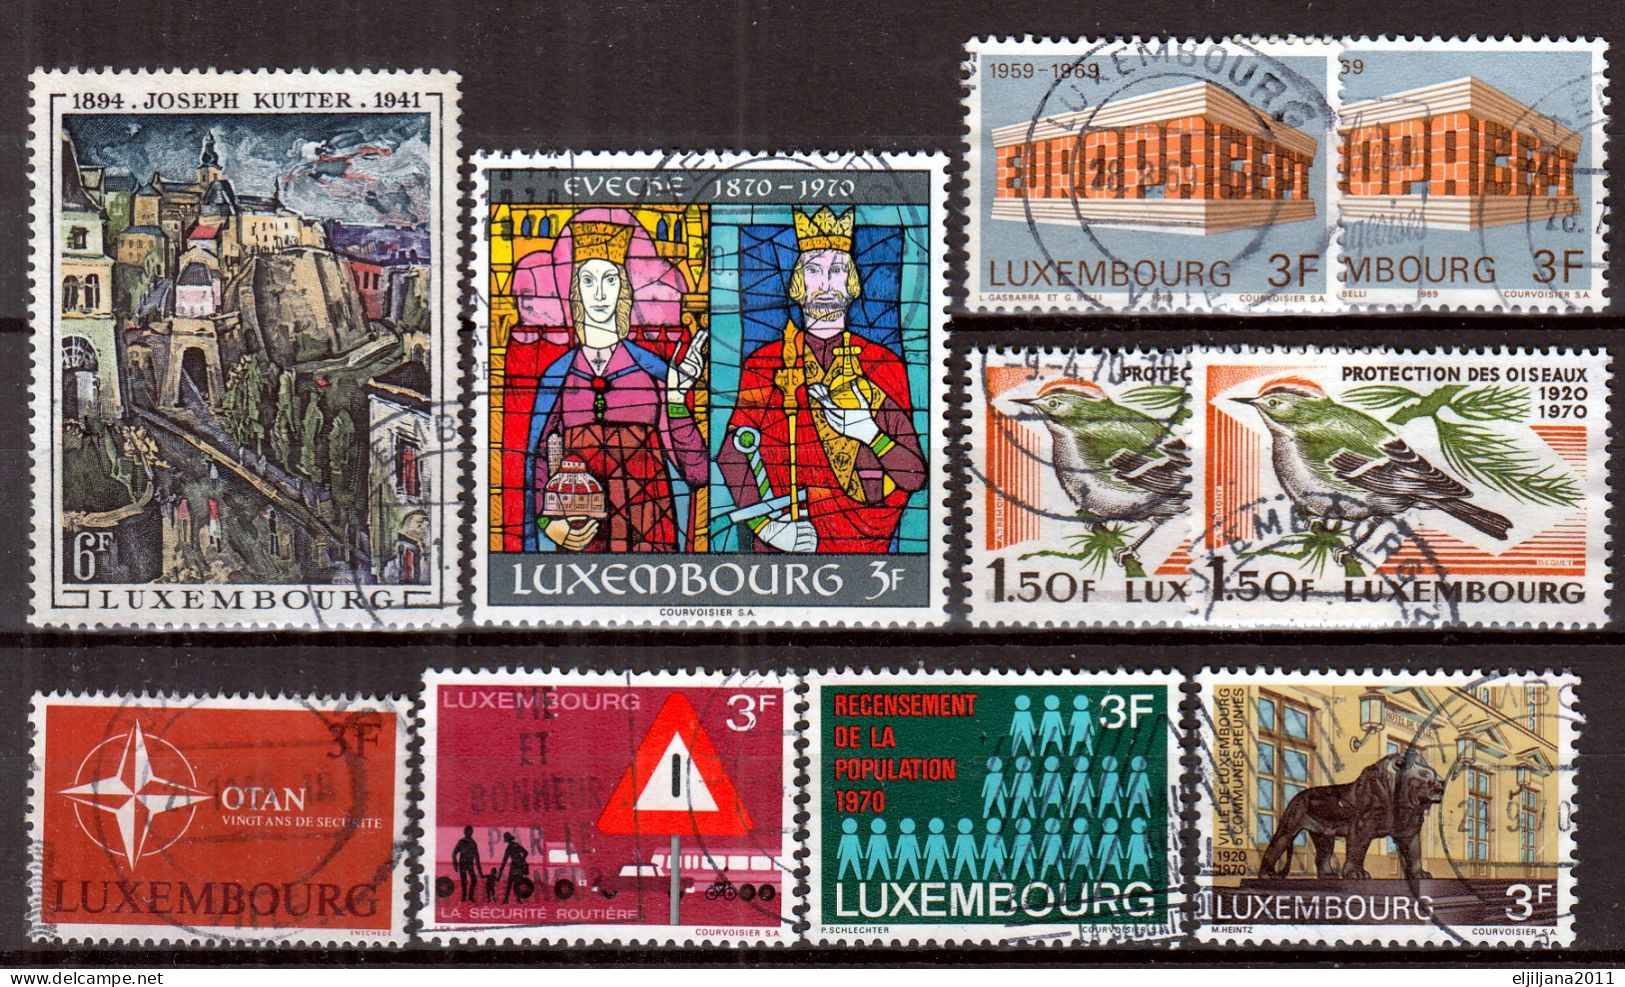 ⁕ LUXEMBOURG 1939 - 1983 ⁕ nice collection / lot ⁕ 155v used stamps - see all scans